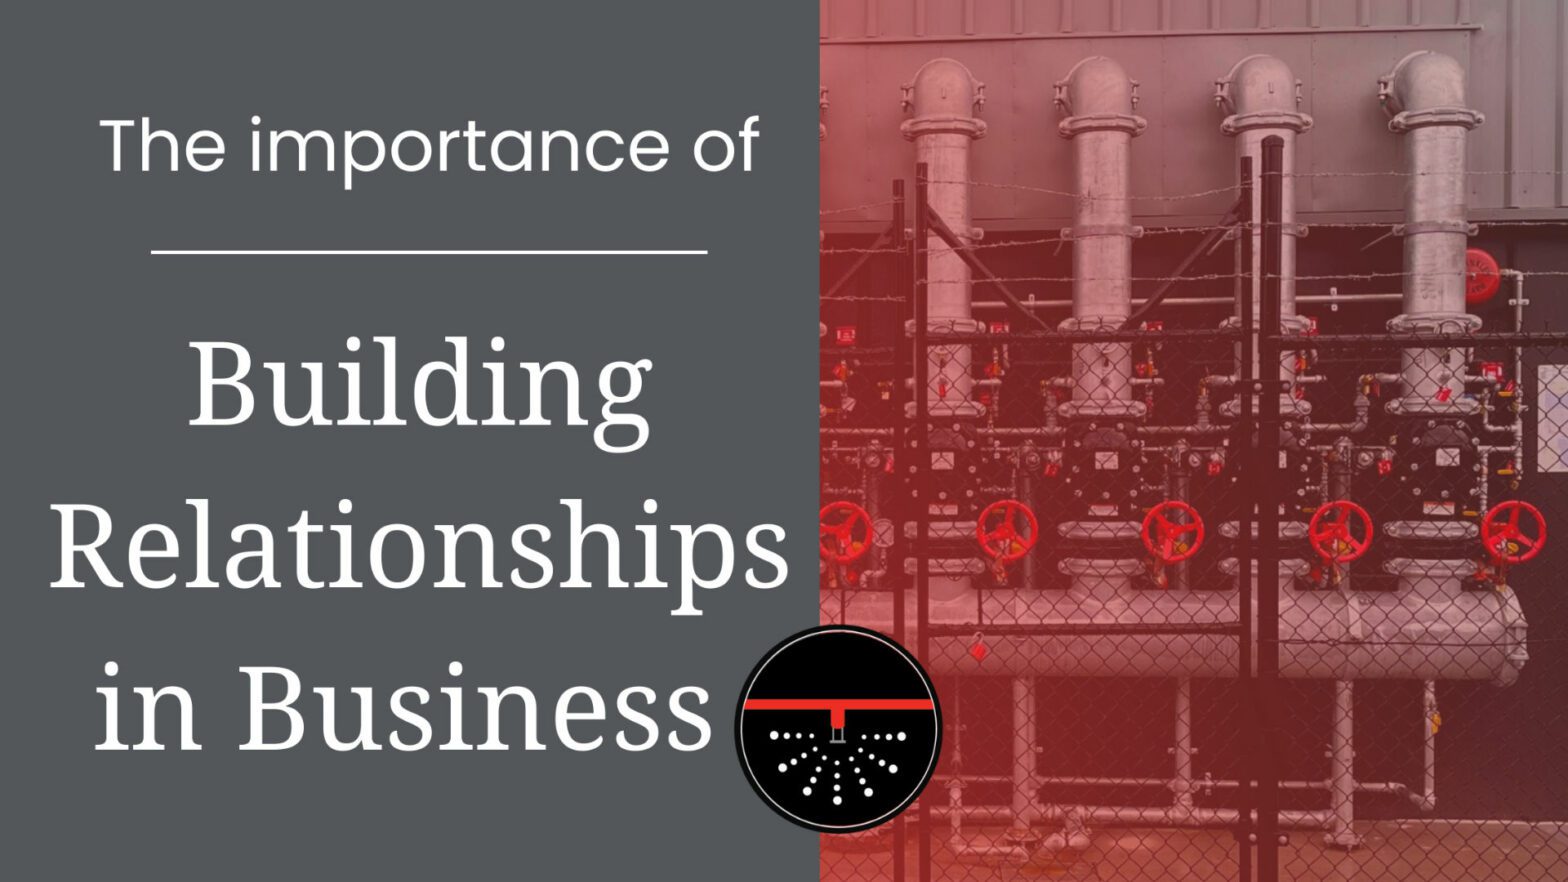 The importance of business relationships